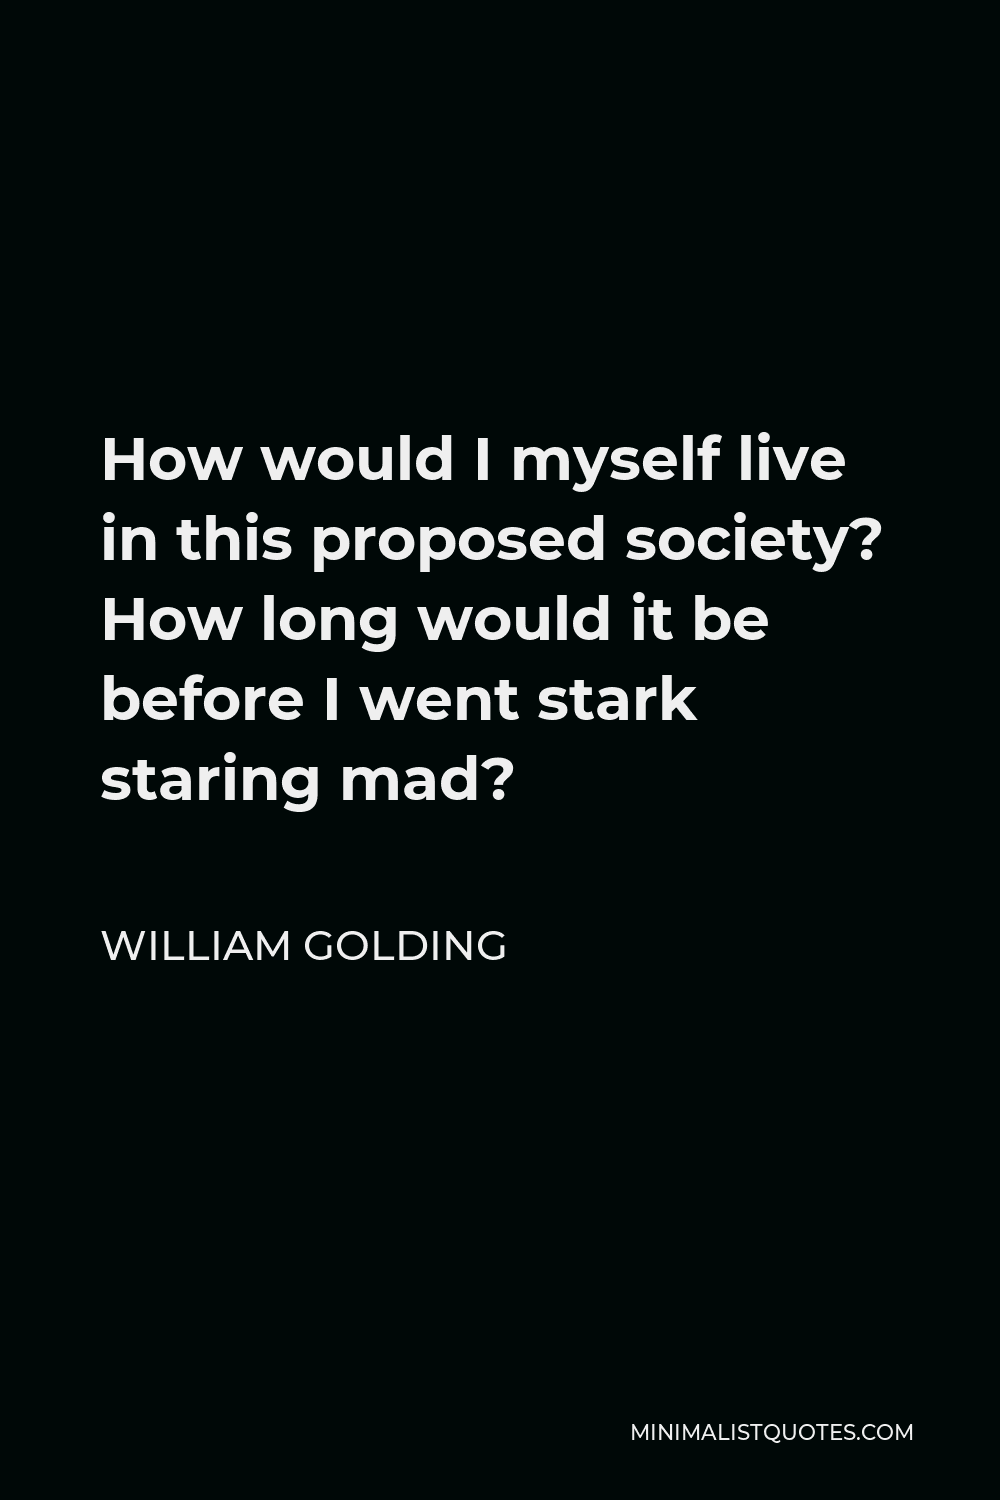 William Golding Quote - How would I myself live in this proposed society? How long would it be before I went stark staring mad?